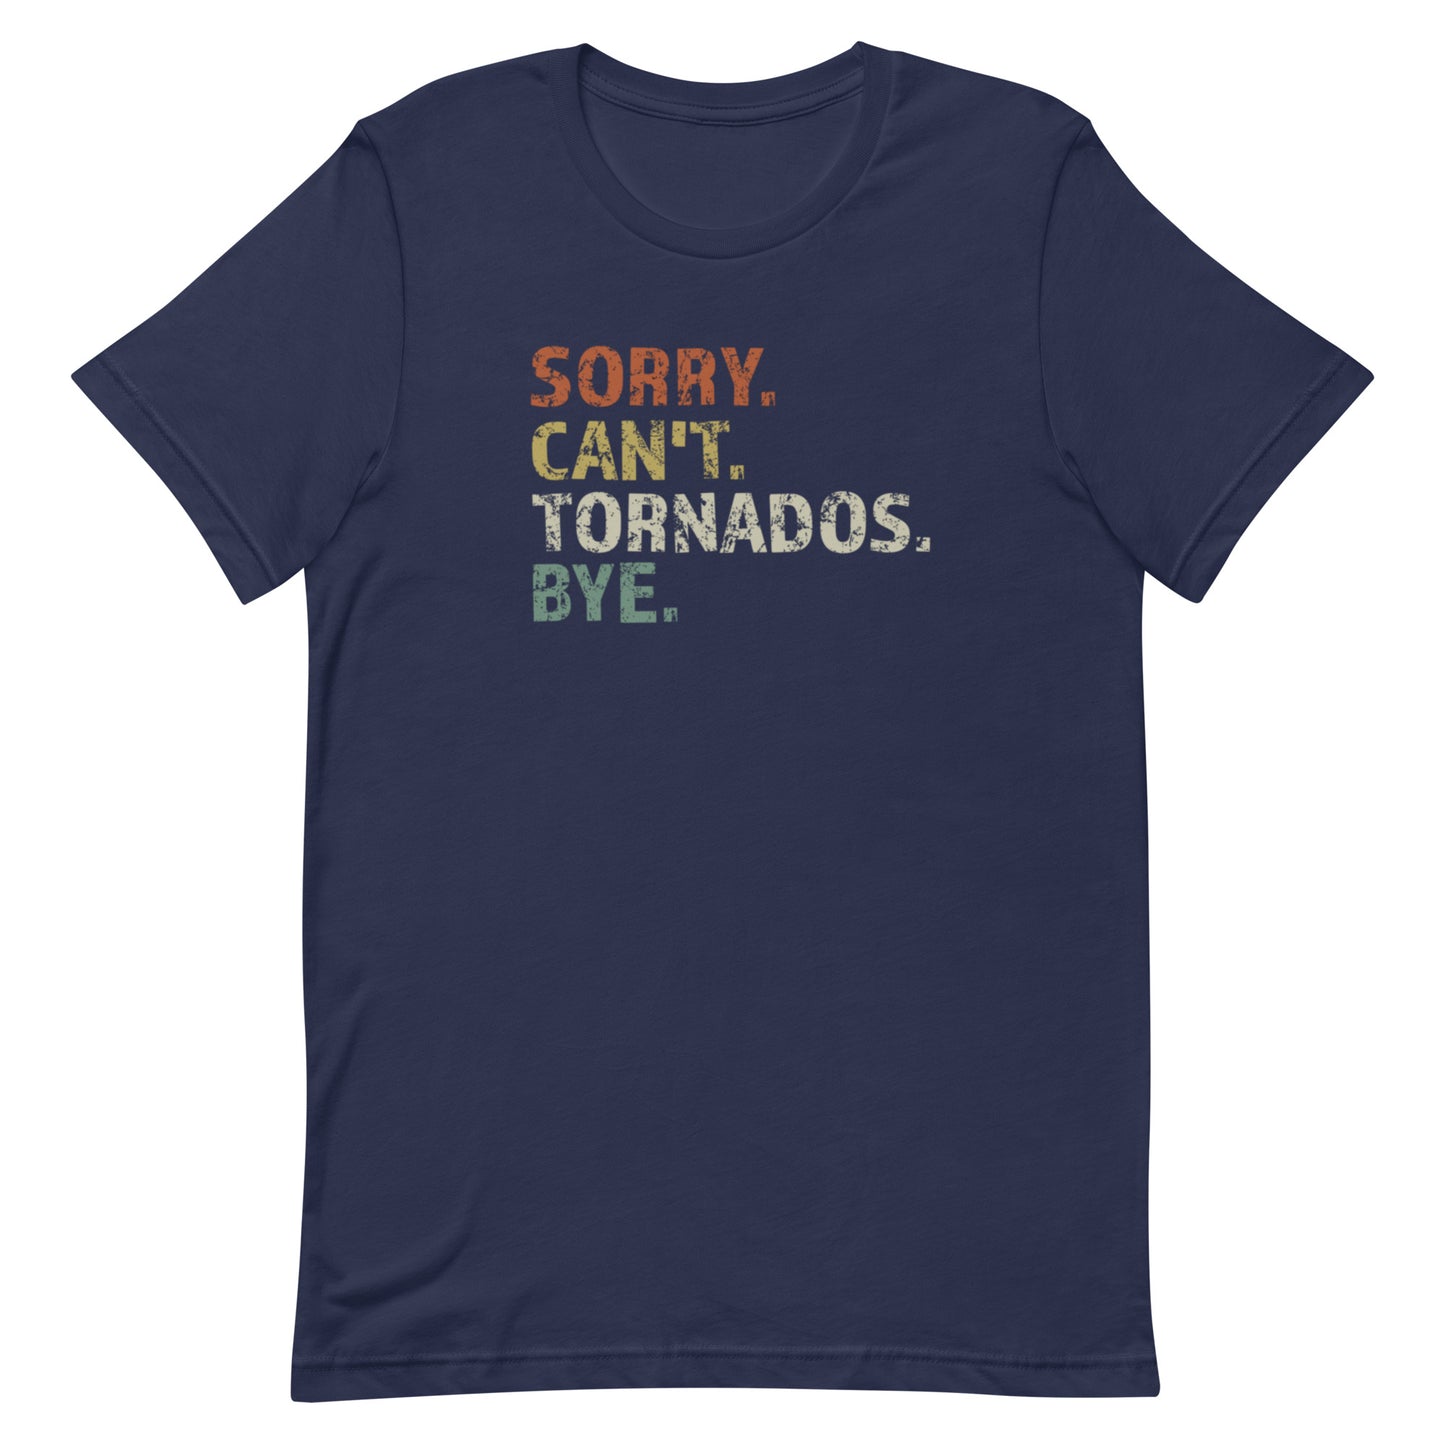 Sorry. Can't. Tornados. Bye.